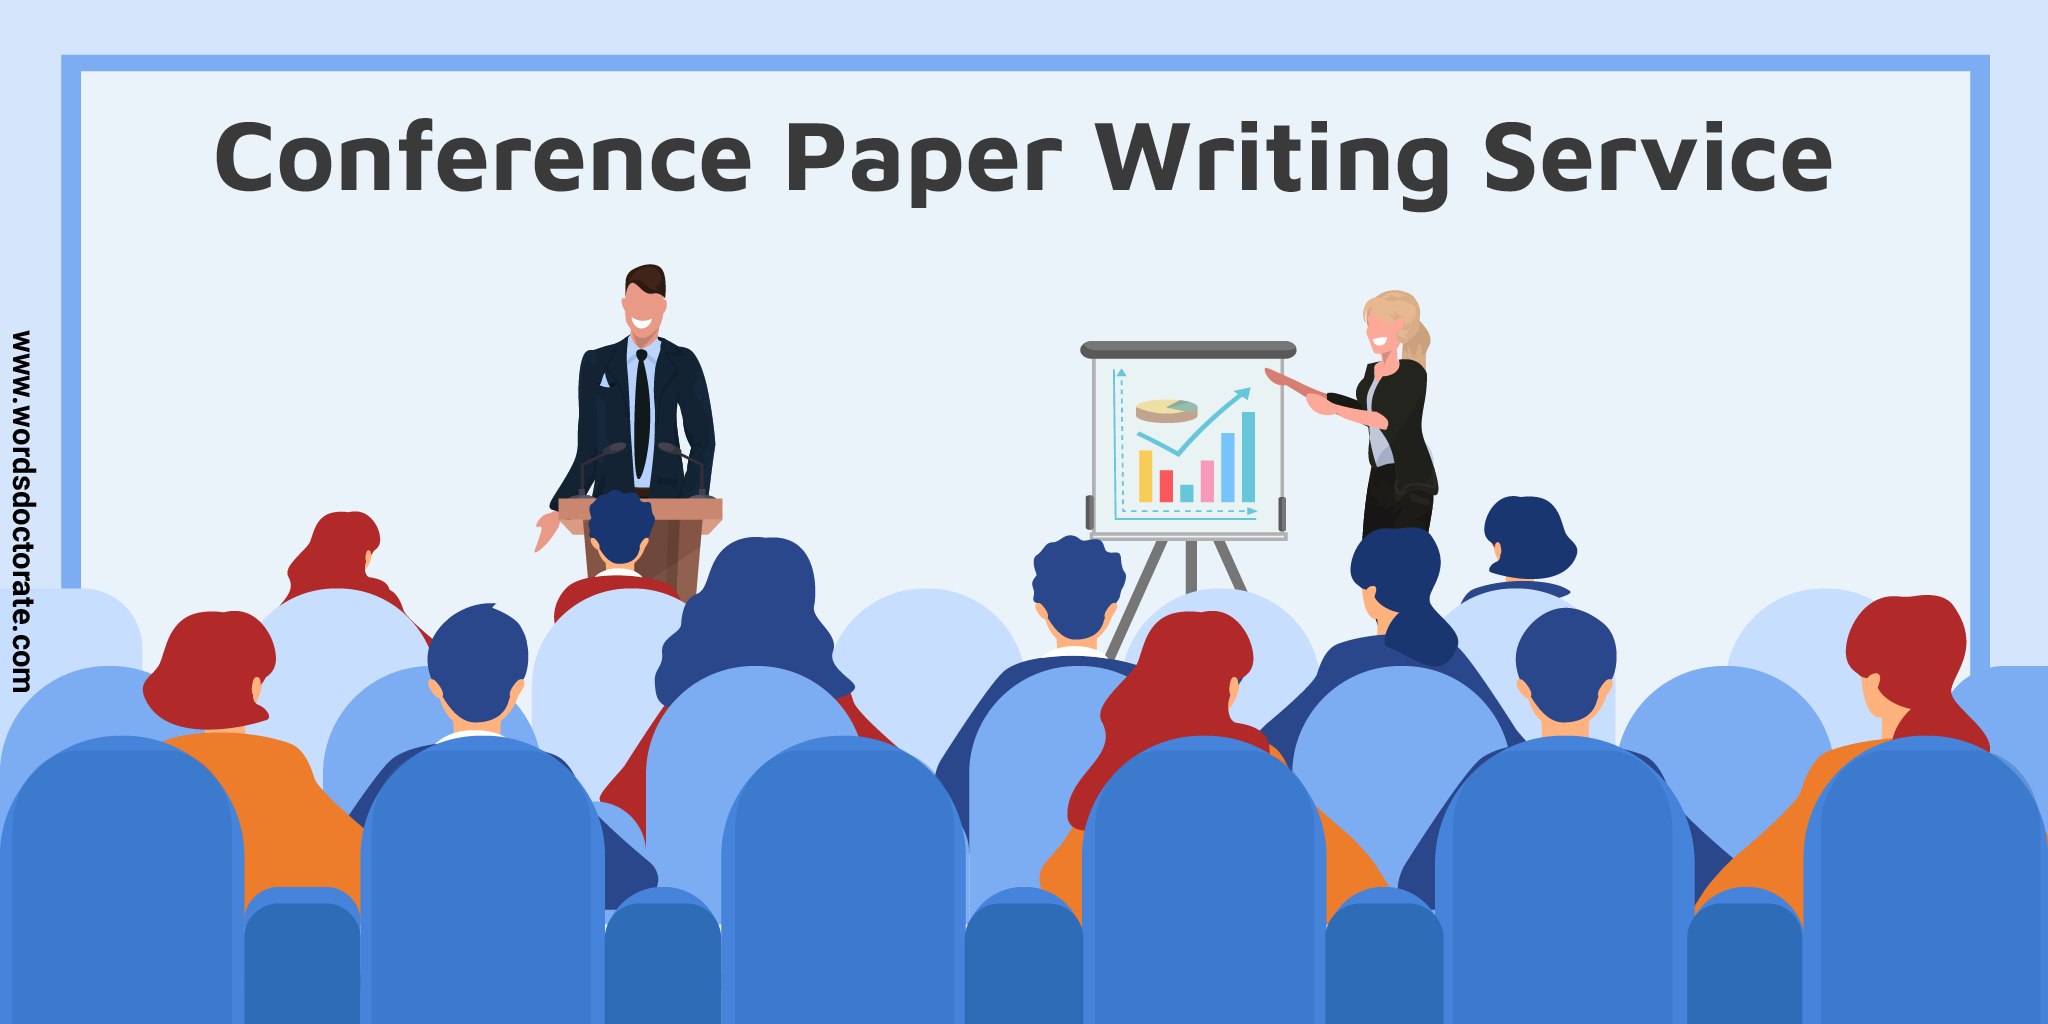 Conference Paper writing service